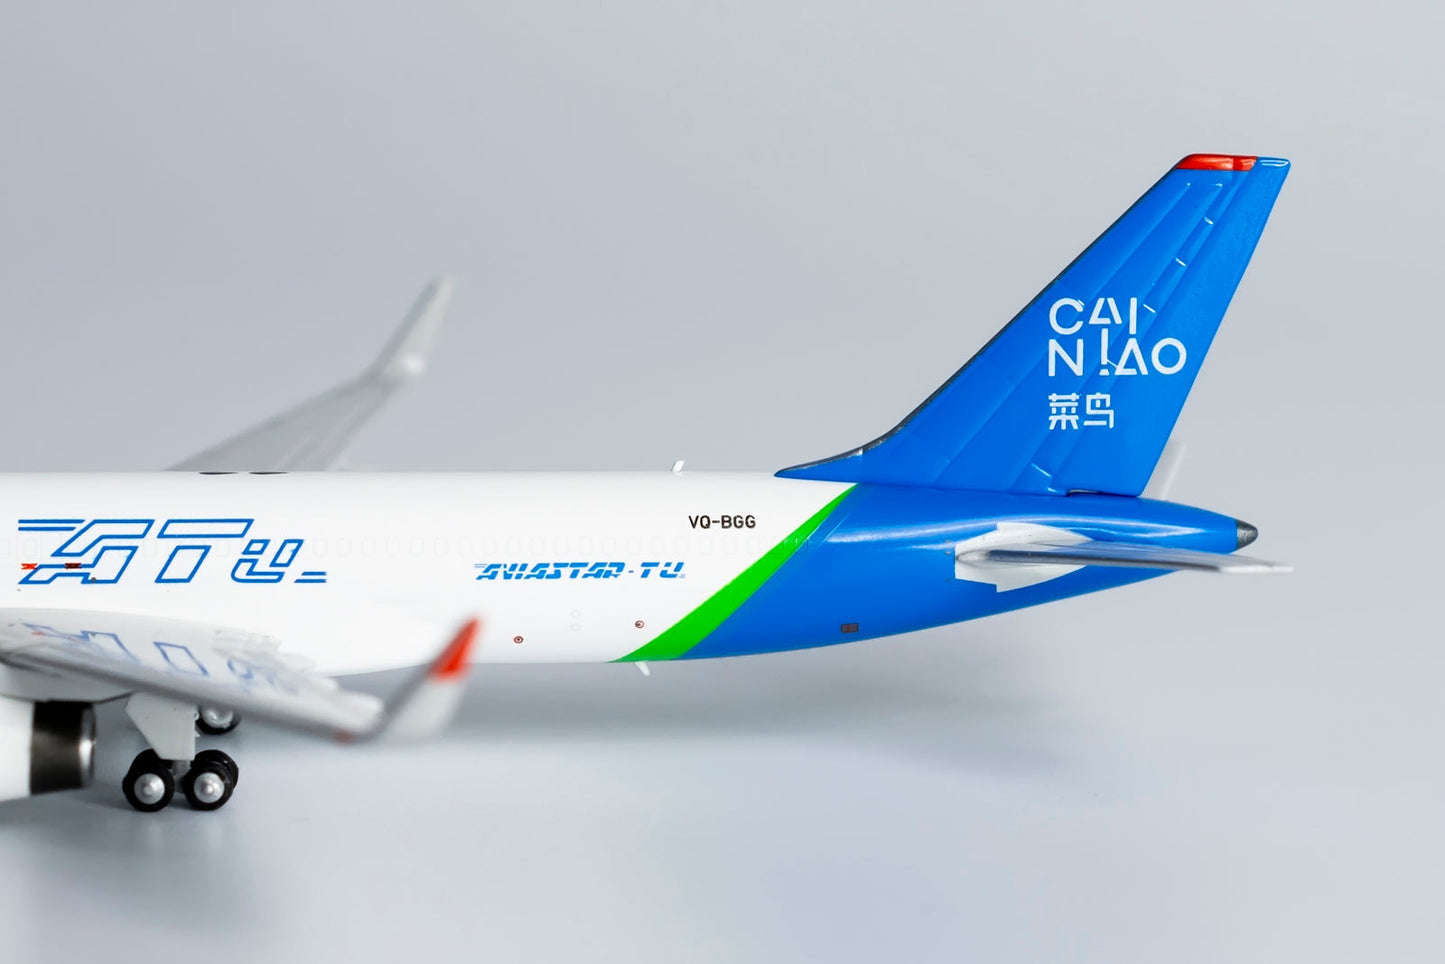 * 1/400 Aviastar-TU Airlines B 757-200PCF "Cainiao Network Livery" NG Models 53189